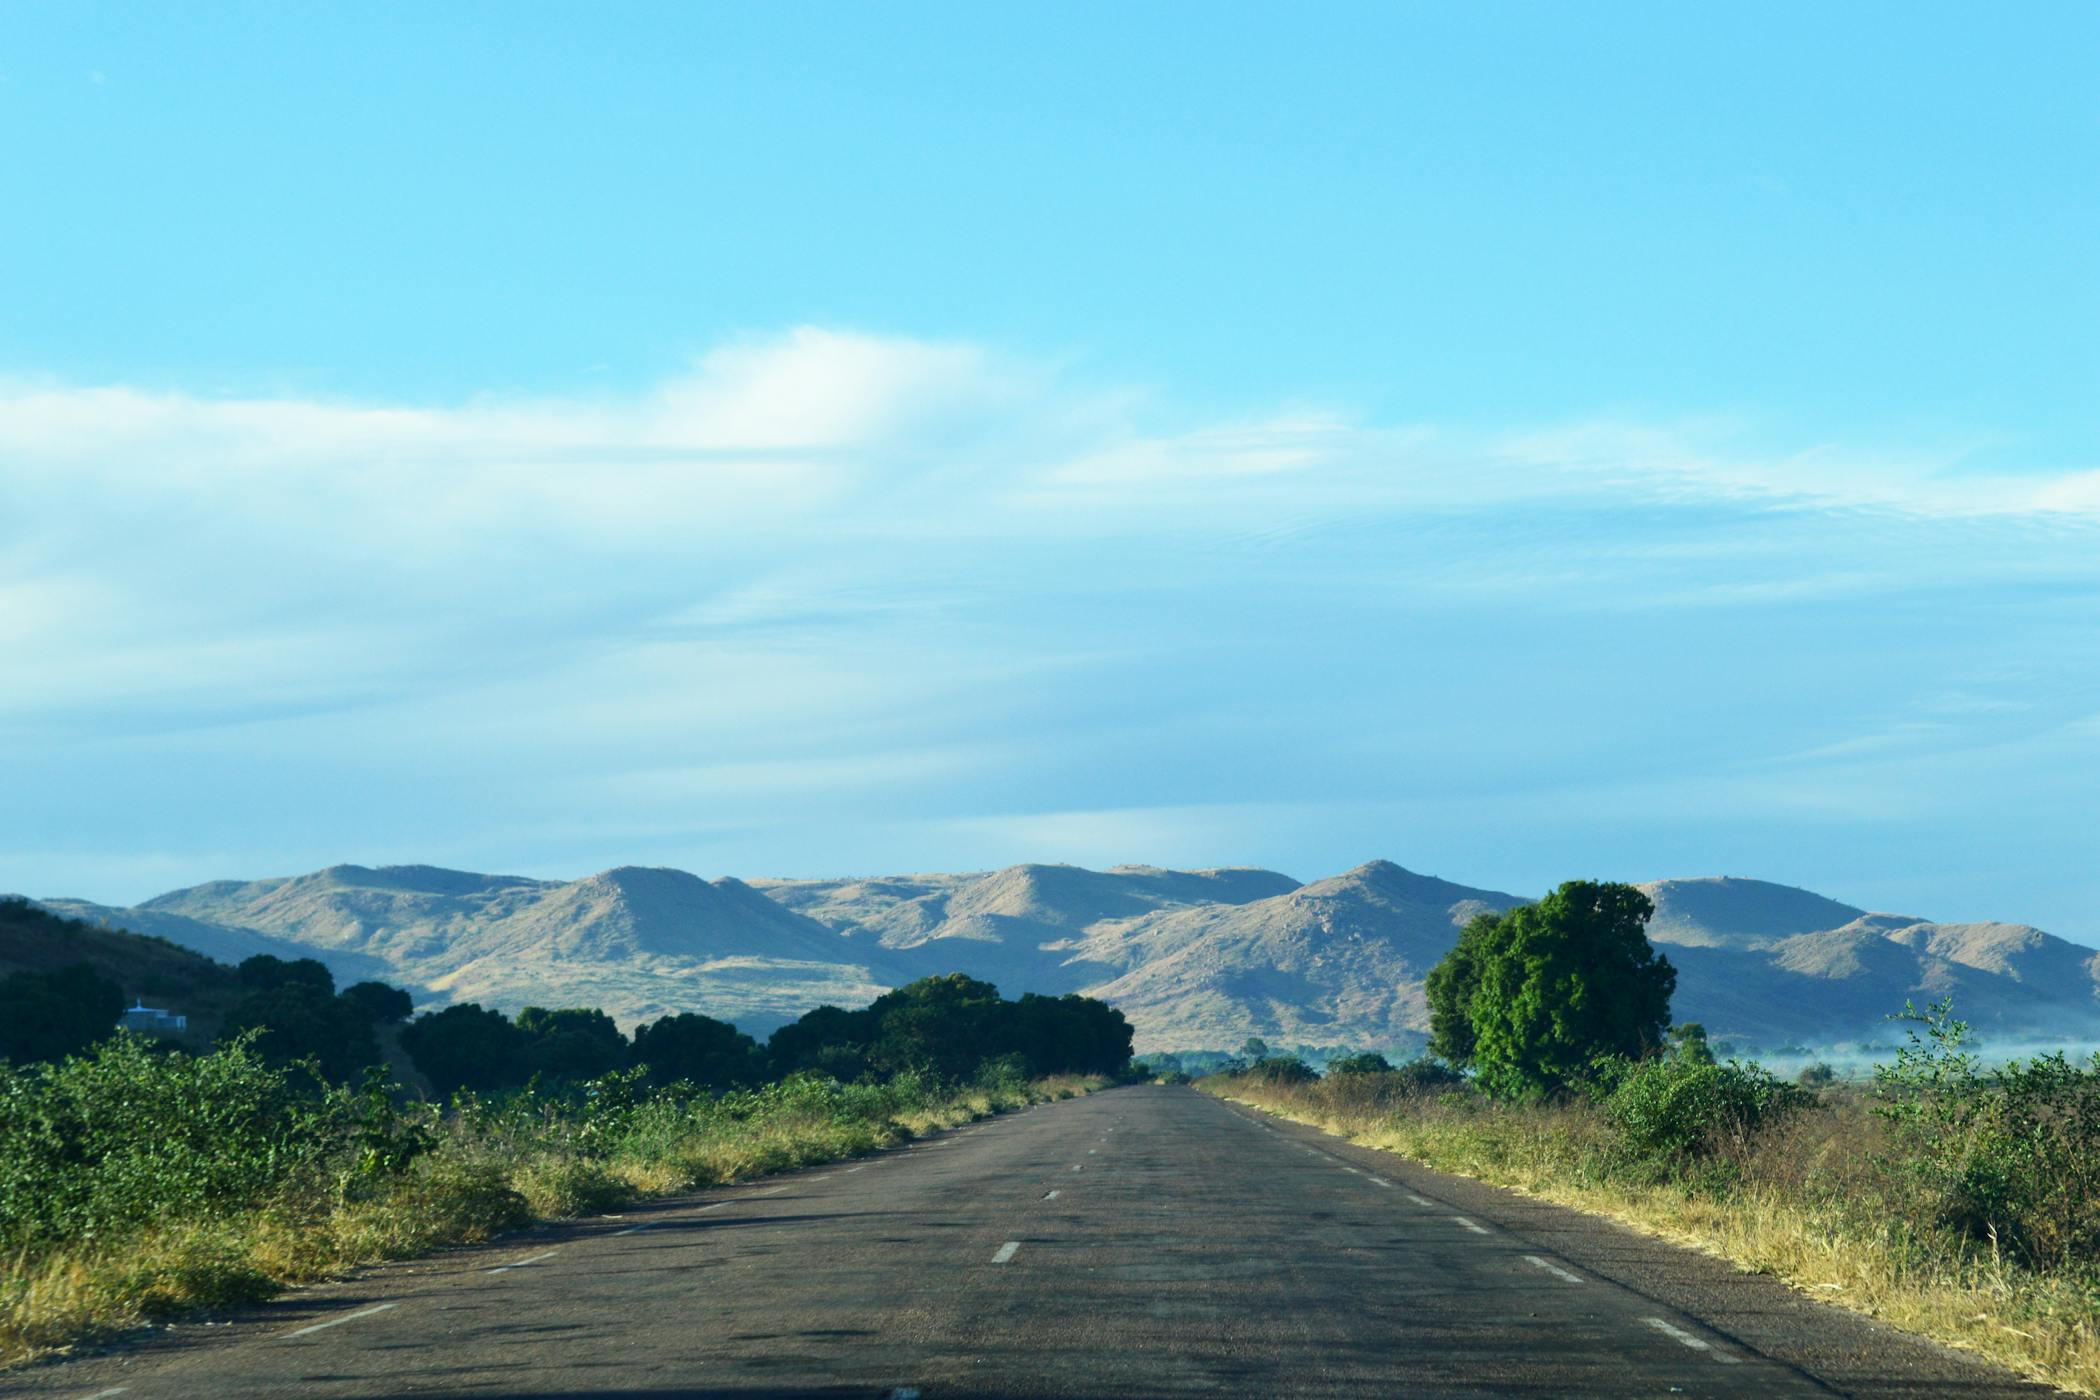 Take in the spectacular scenery en route from Andasibe to Antsirabe